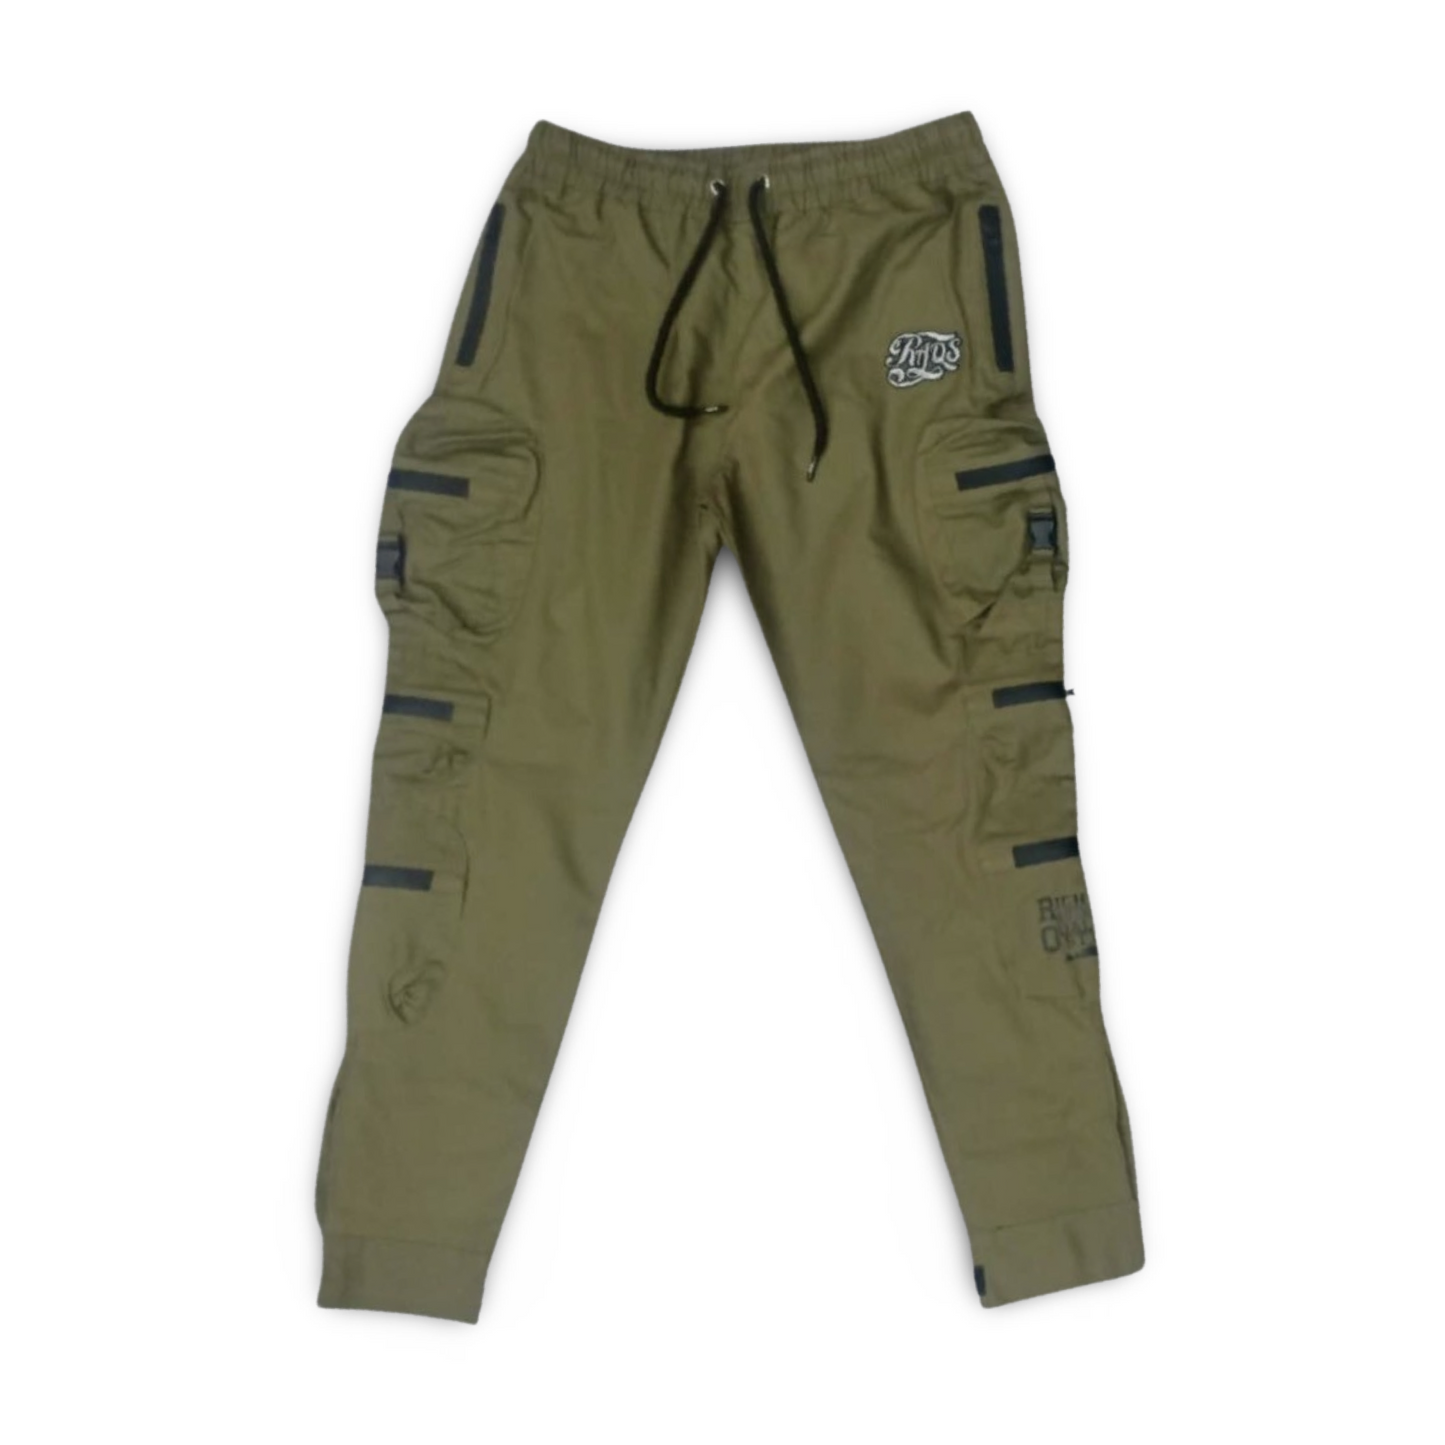 Raqs Gear Utility tech suit (olive green)